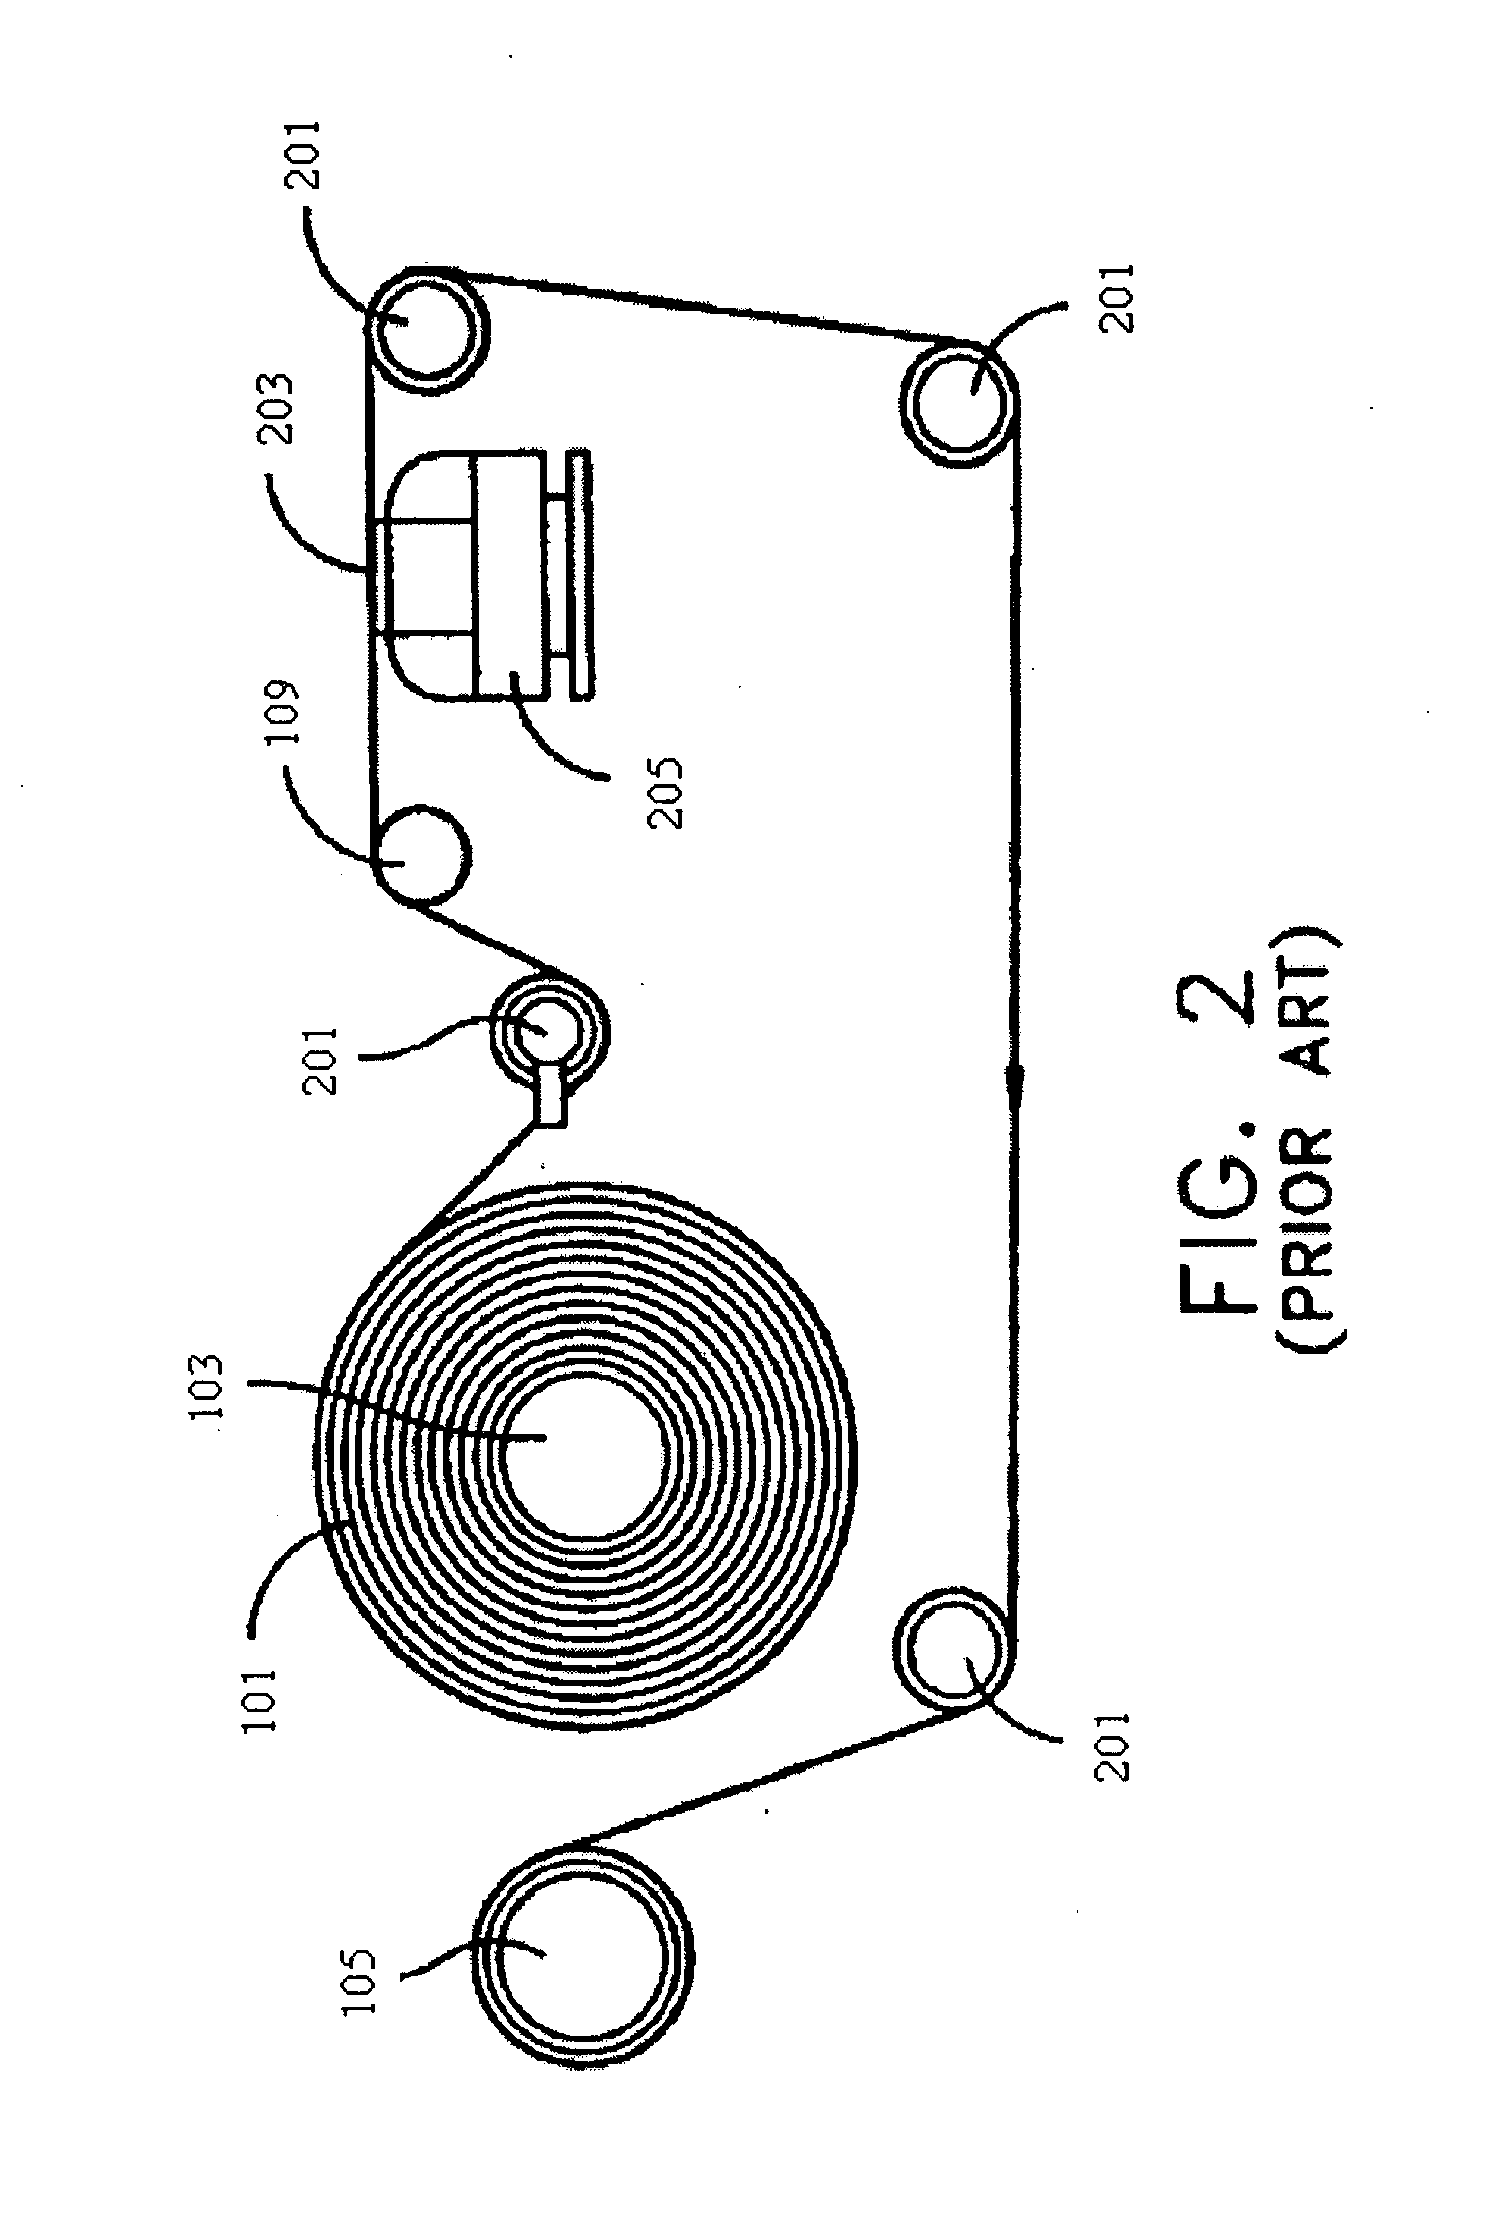 Methods and apparatus for engaging web-material cores